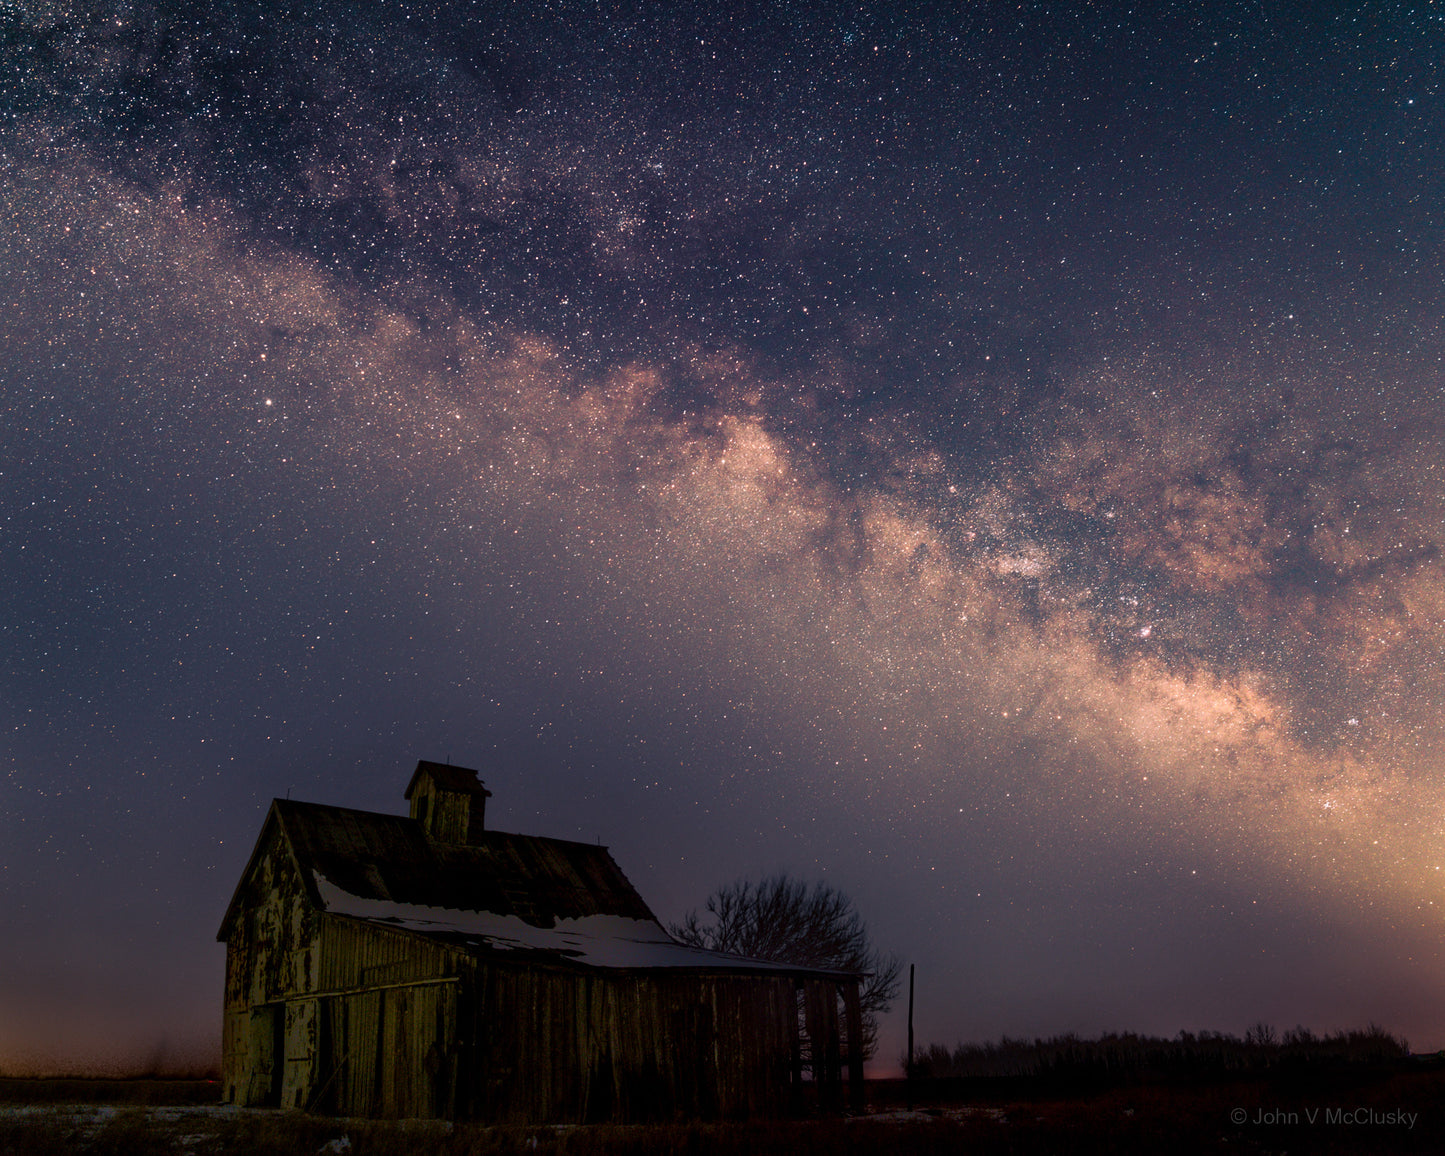 An old barn sits in starlight under the Milky Way in Central Illinois, in this landscape image print.